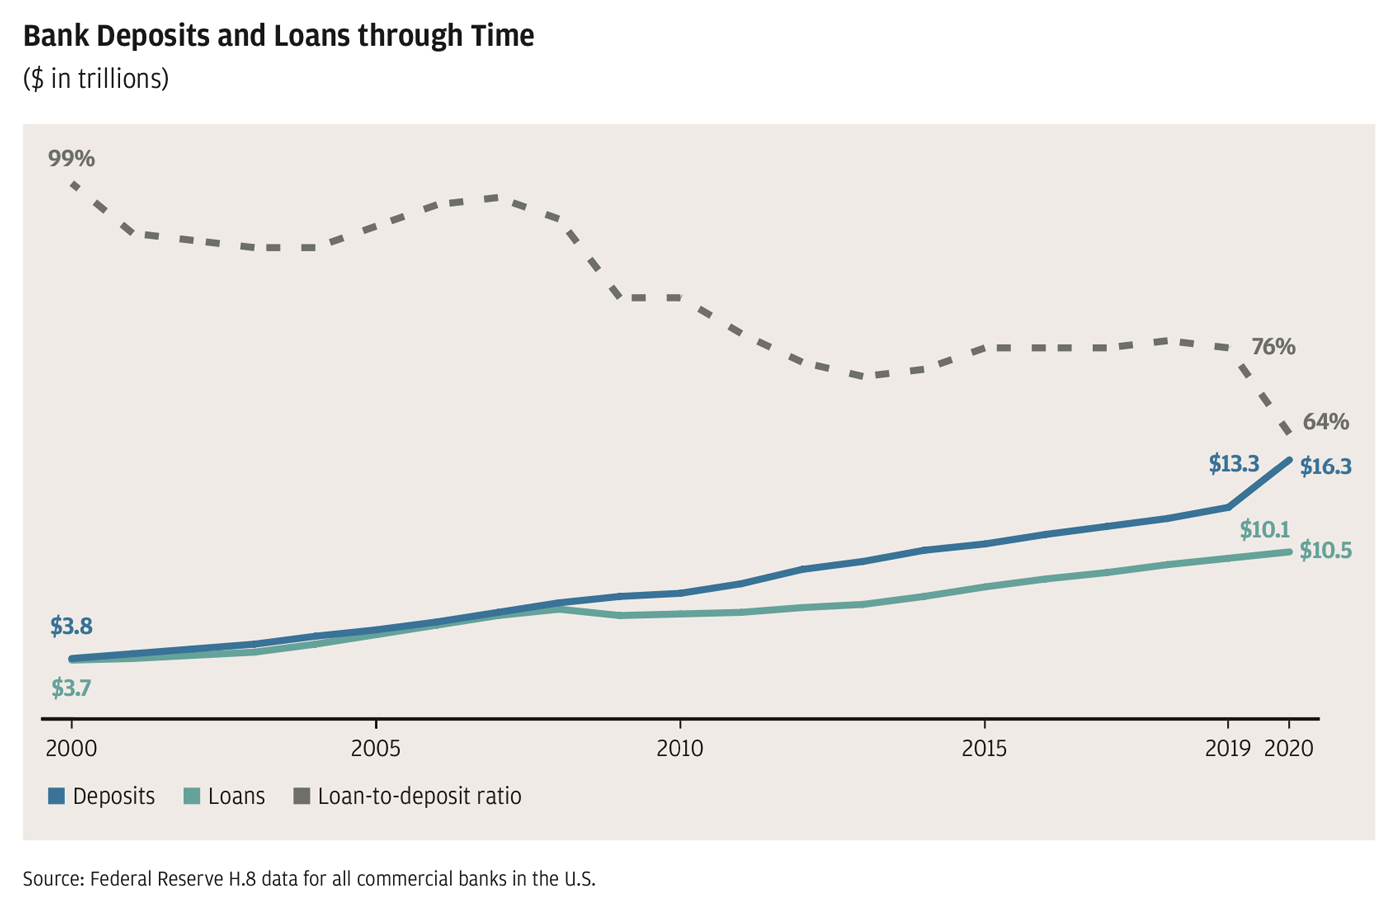 Line graph showing 2000 to 2020 trends for bank deposits, loans and loan-to-deposit ratio